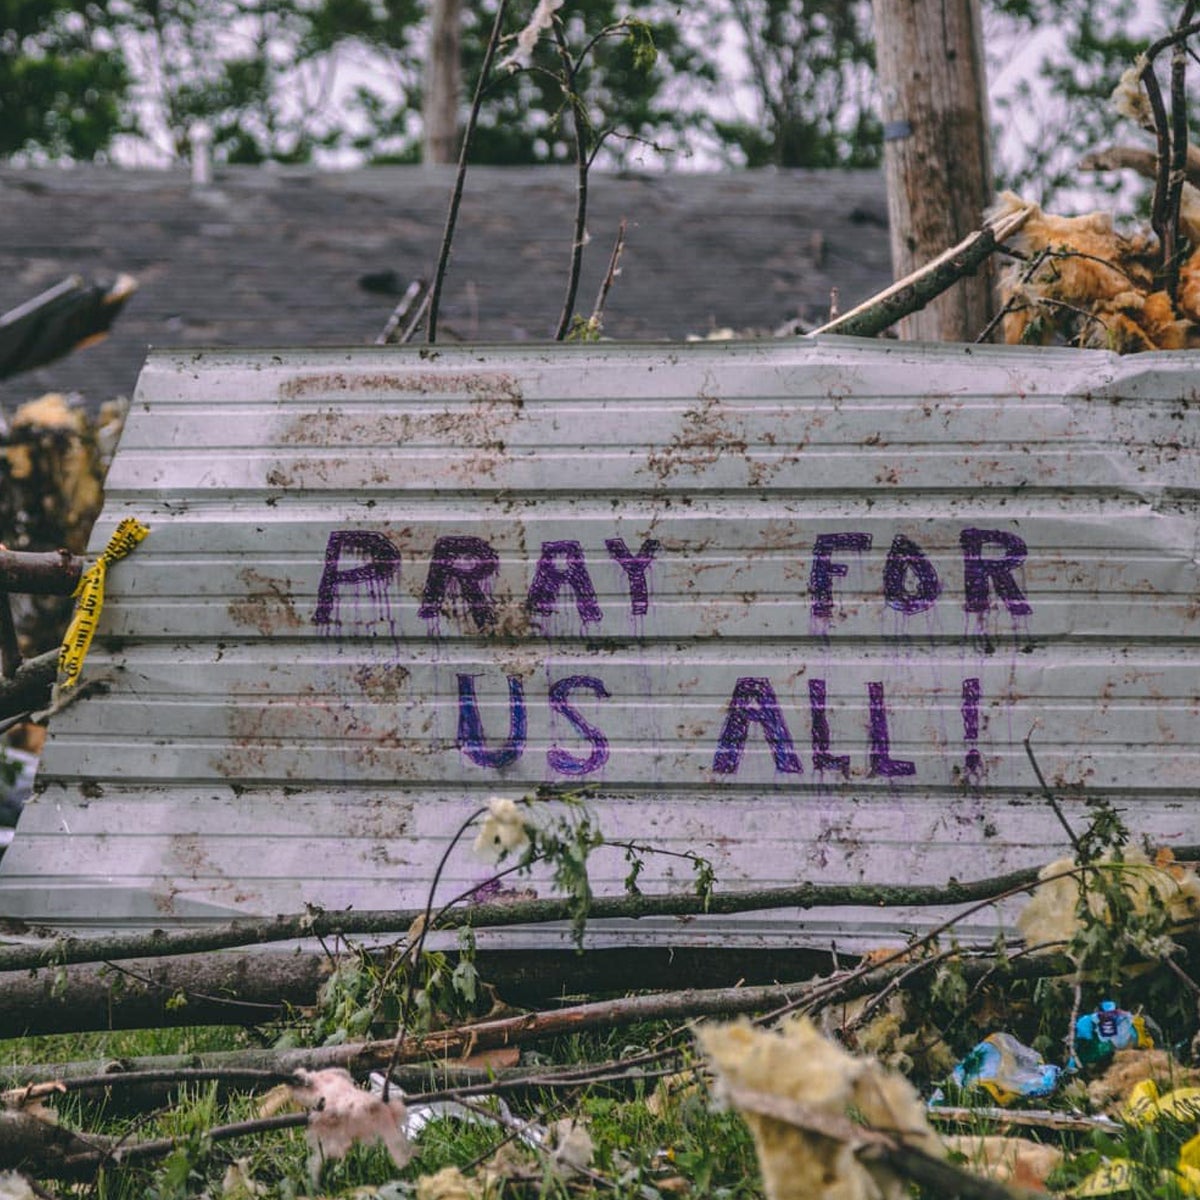 A sign in the rubble of the Dayton Tornado saying, "Pray for us all."